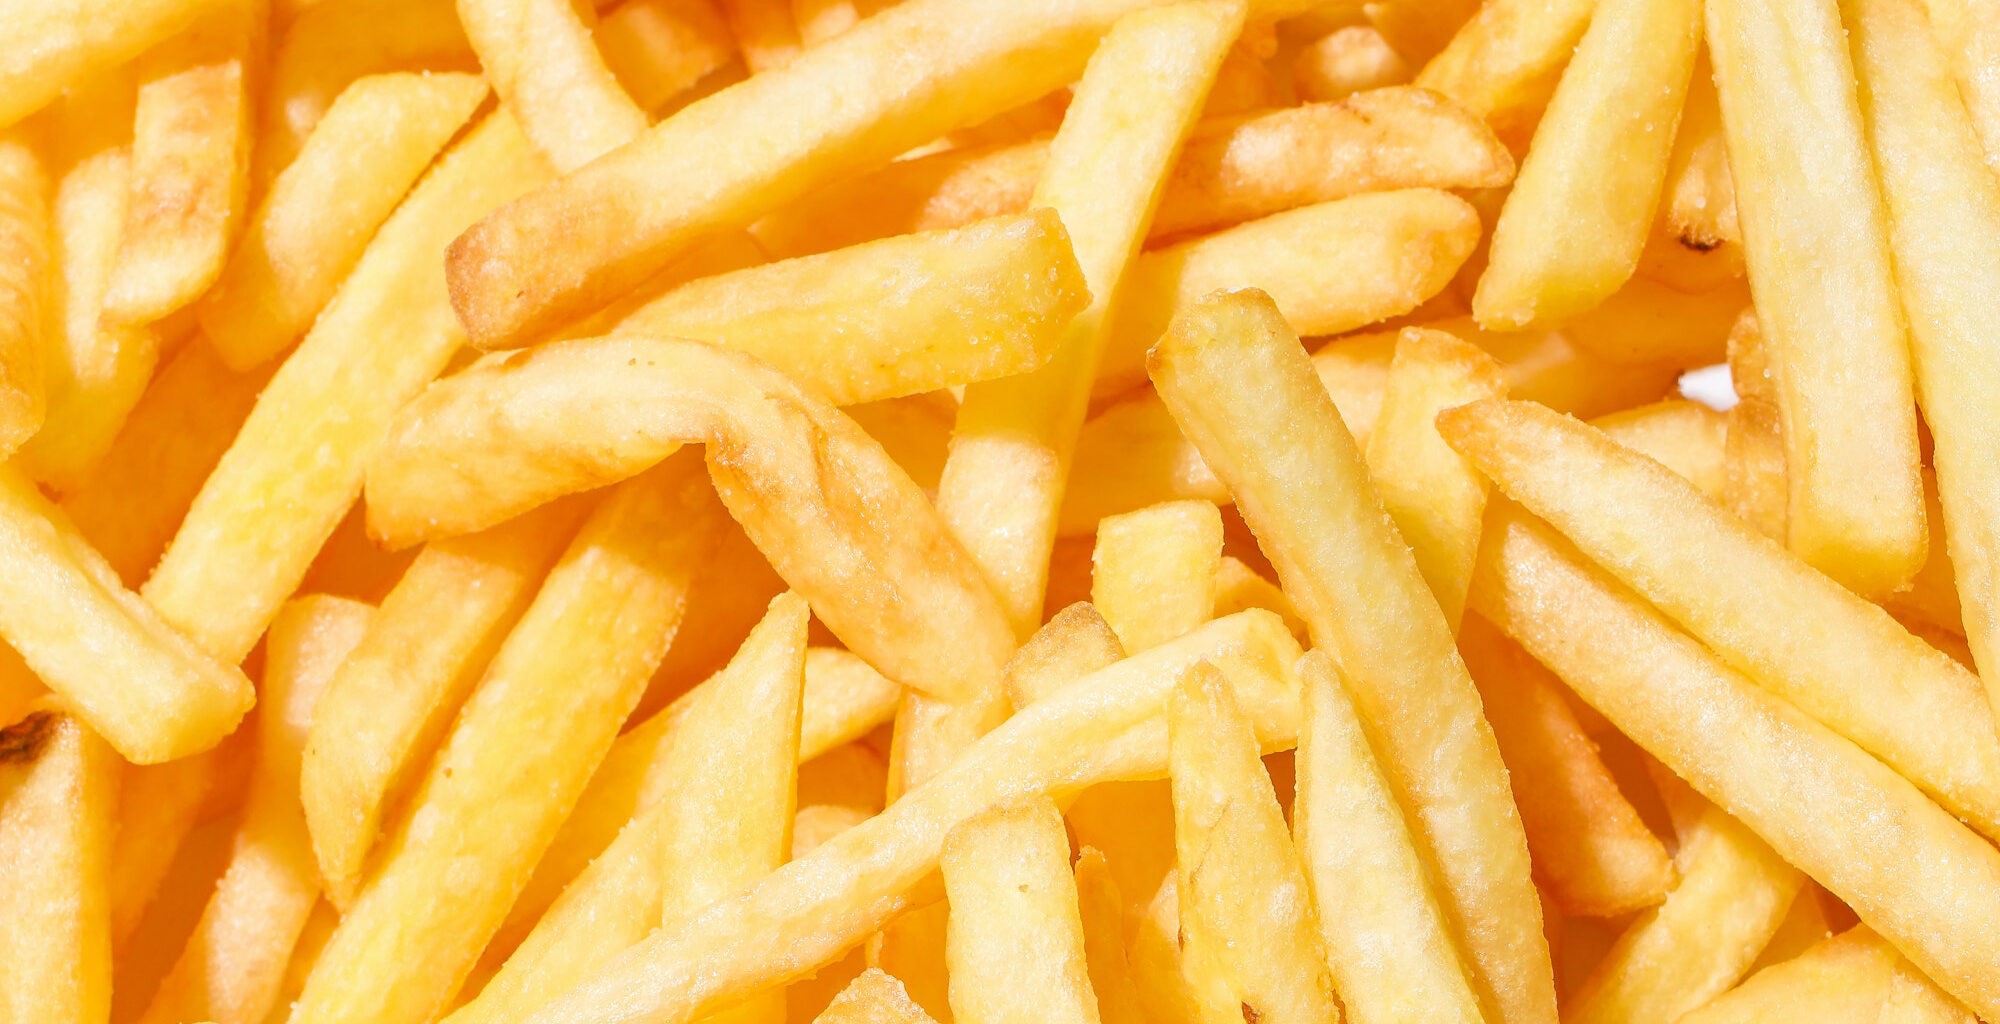 image showing lots of fries